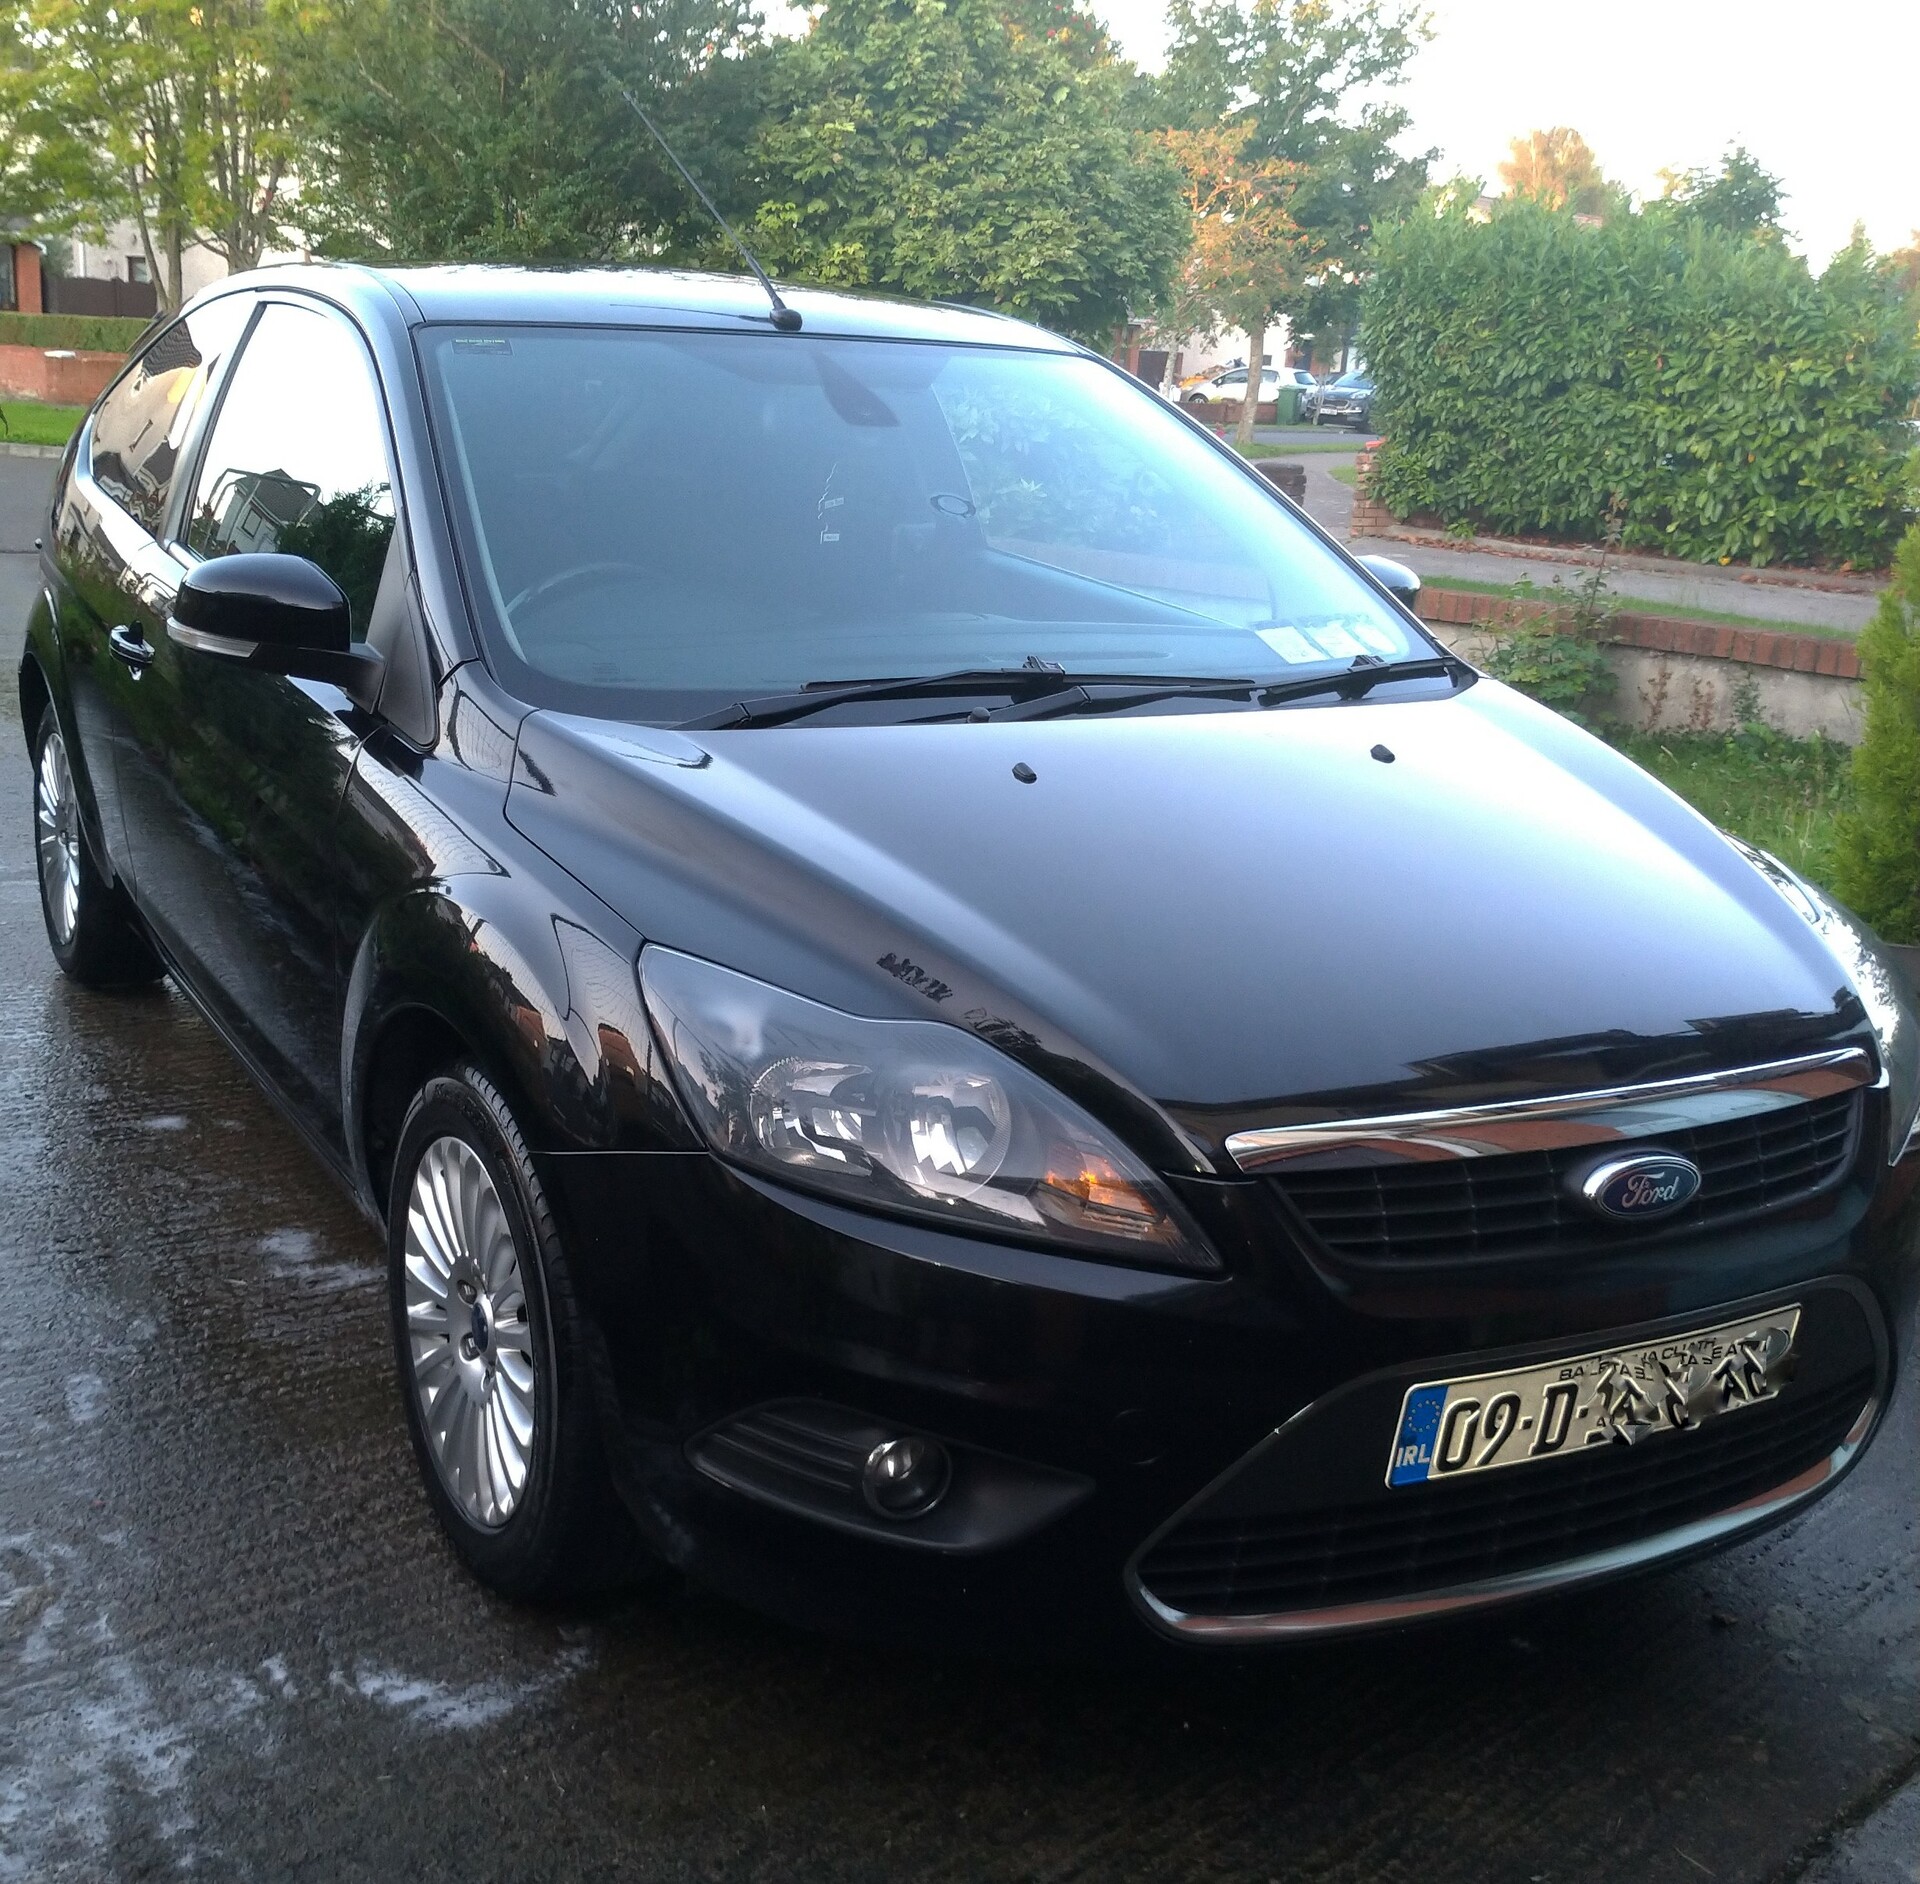 Used Ford Focus 2009 in Kildare